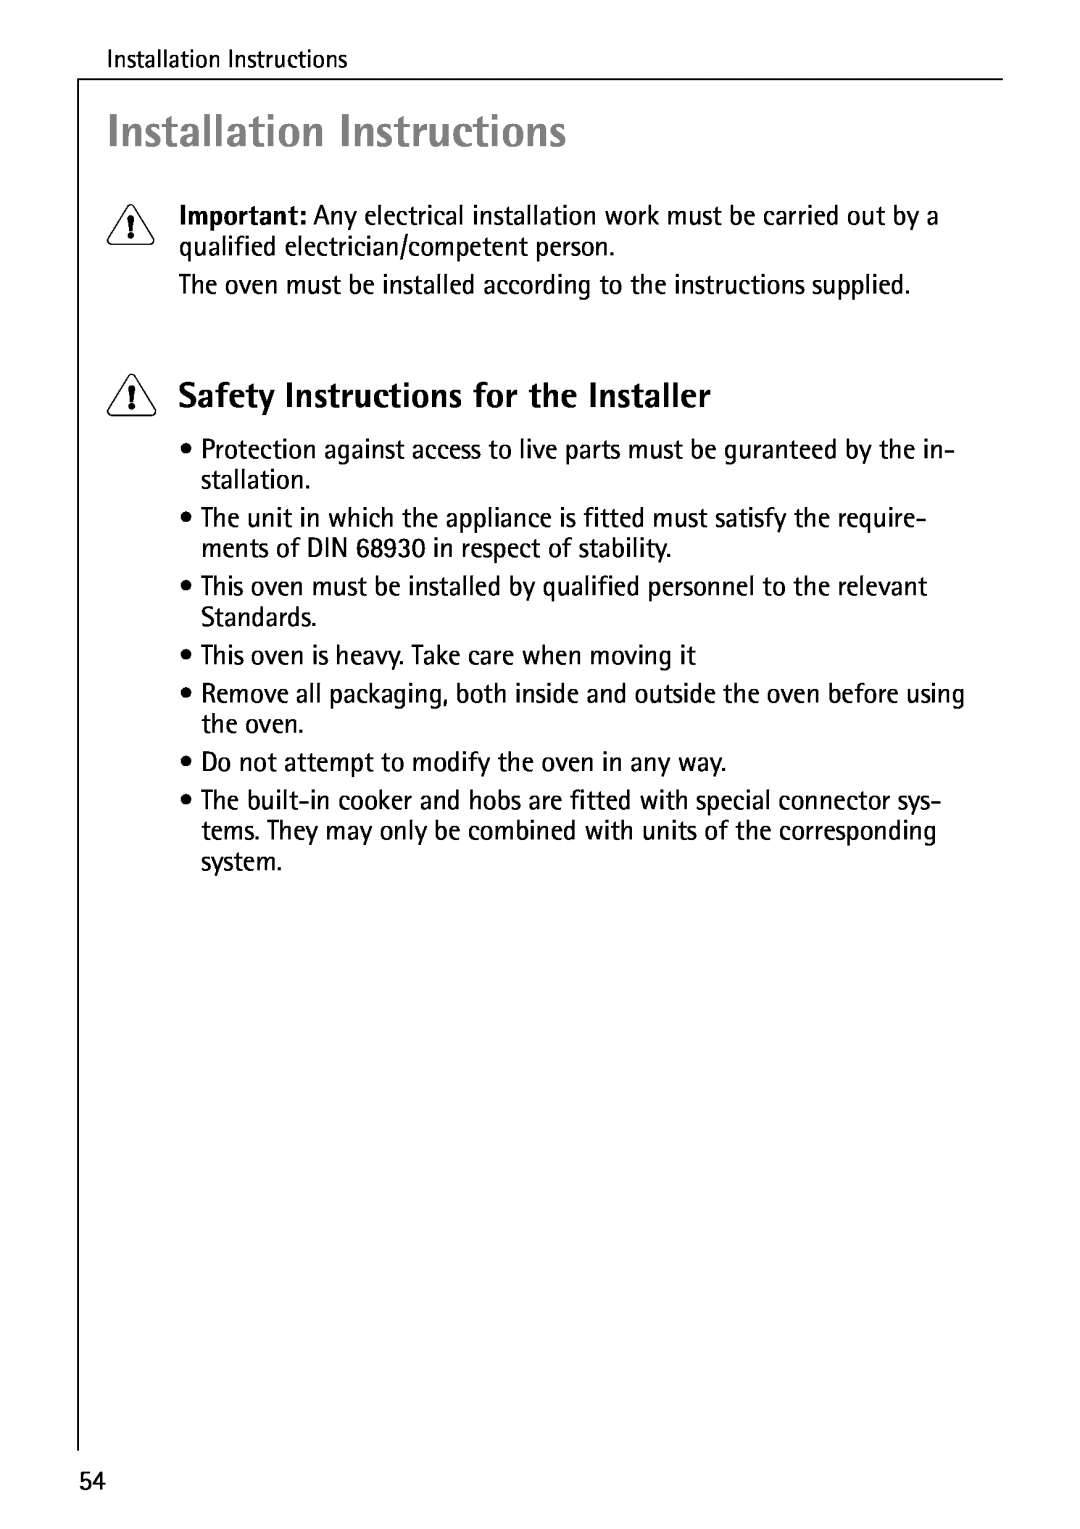 Electrolux B4140-1 manual Installation Instructions, Safety Instructions for the Installer 